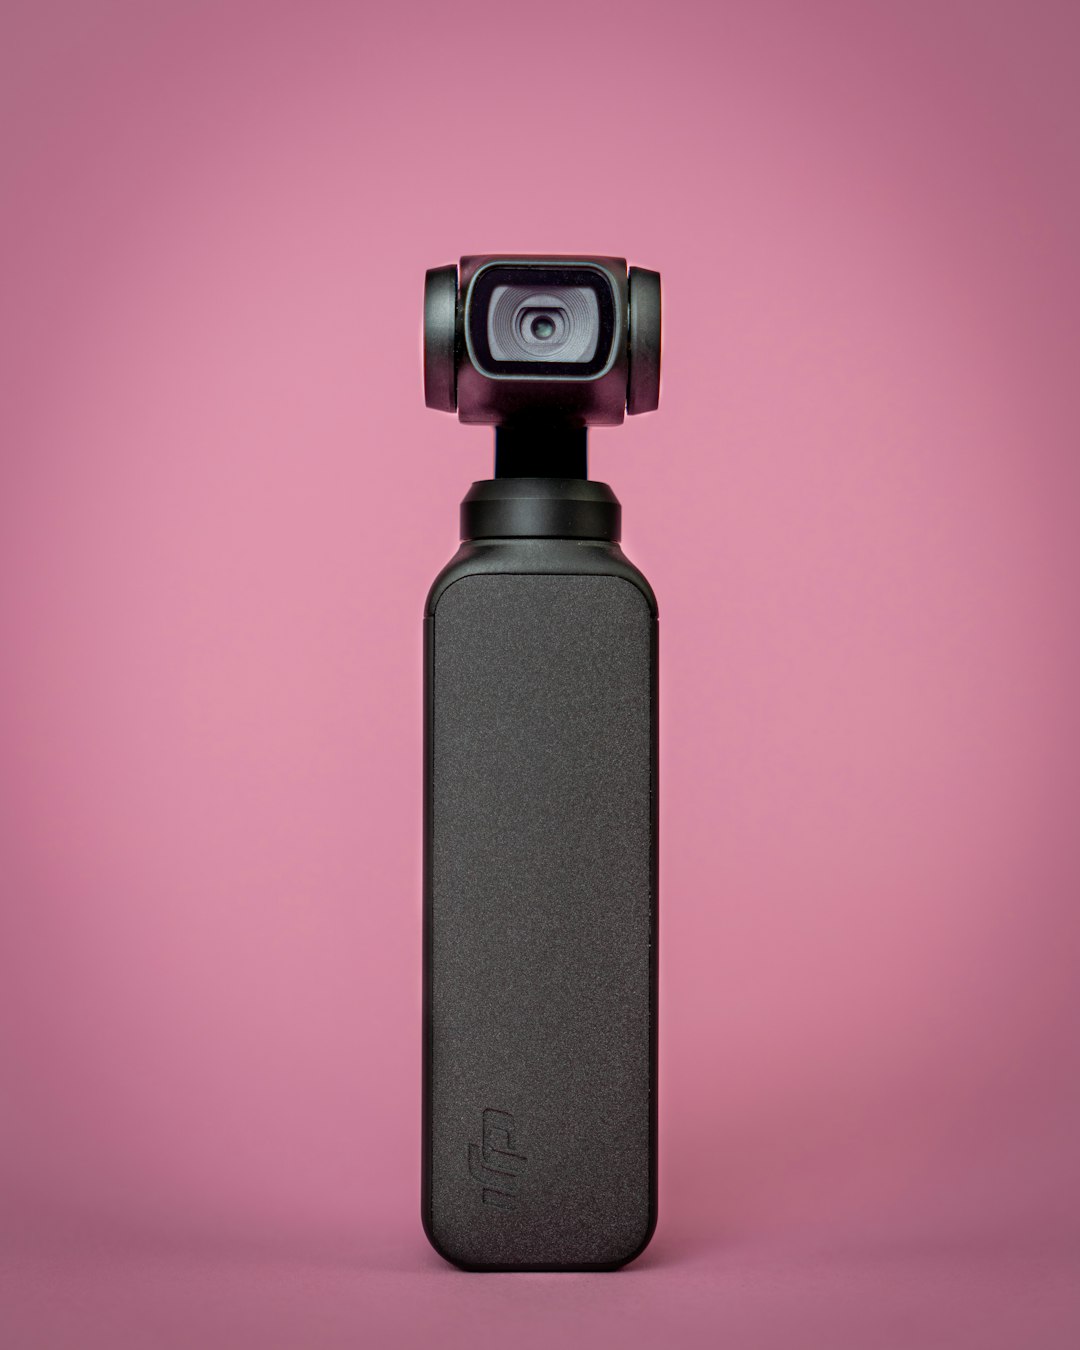 A 4k camera with gimbal (DJI Osmo Pocket) for smooth, handheld video shots.